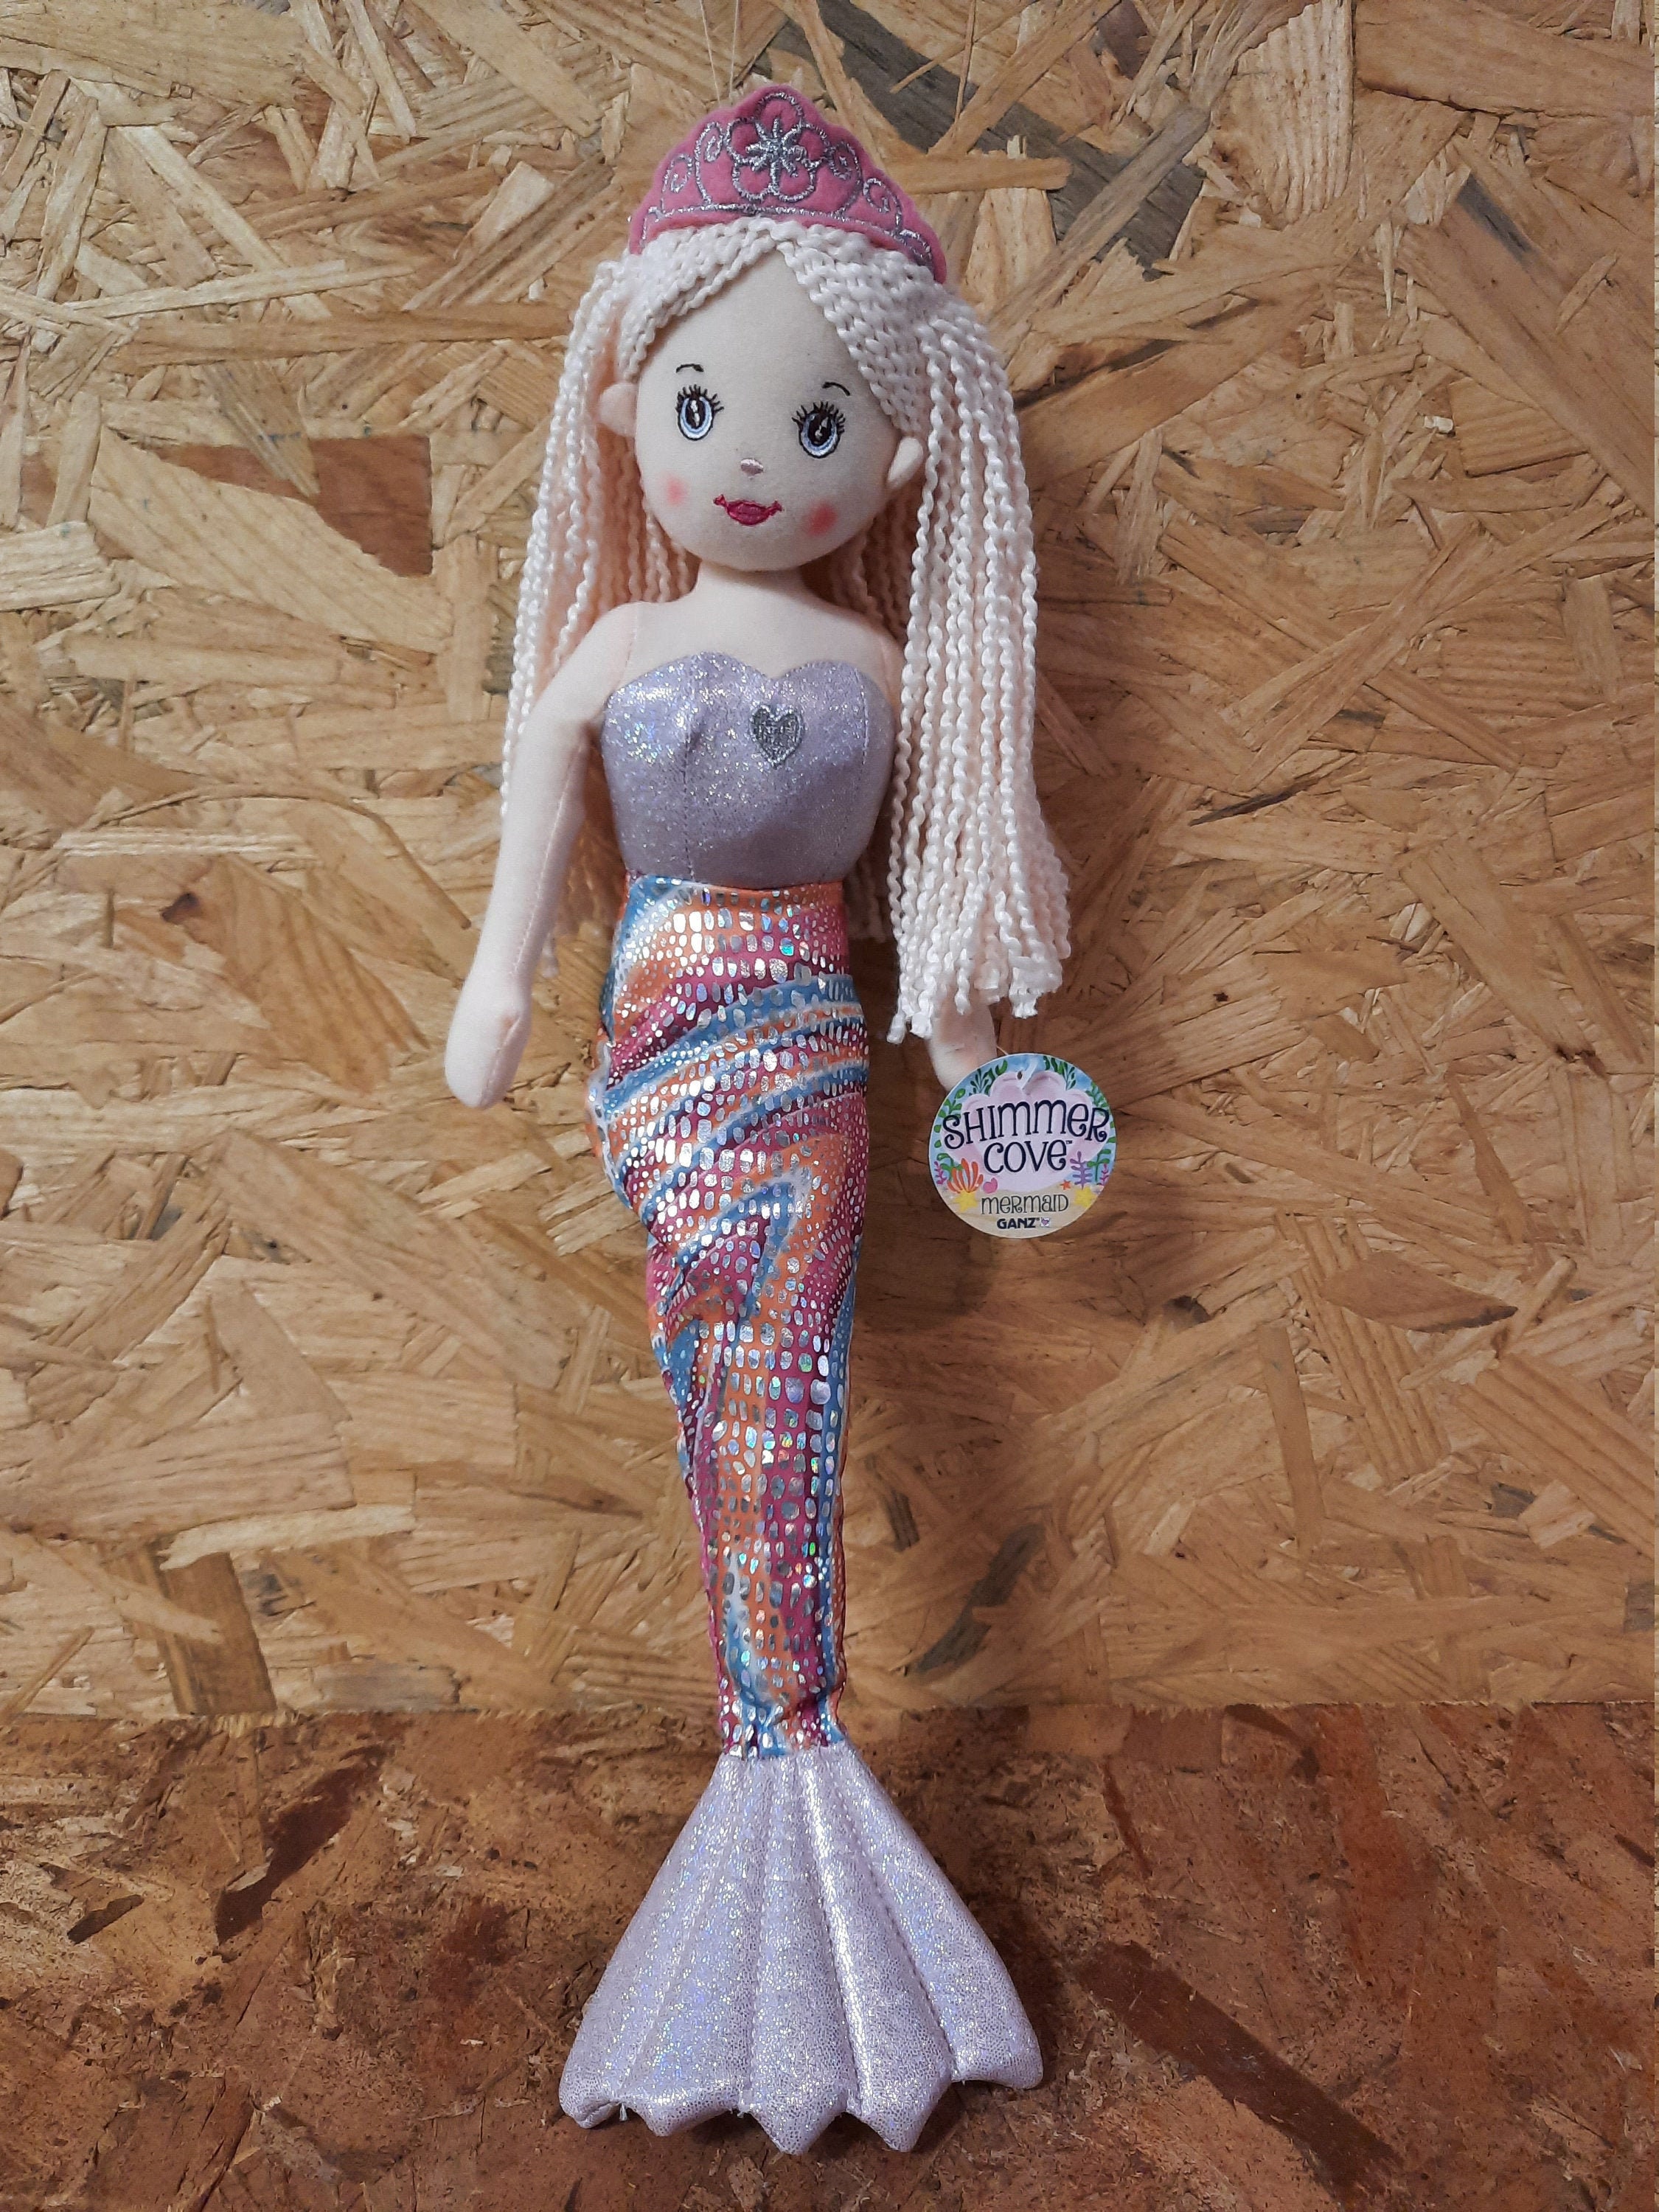 New Ganz 18" Shimmer Cove Mermaid FIONA Stuffed Toy Plush Doll gift Brown Pink